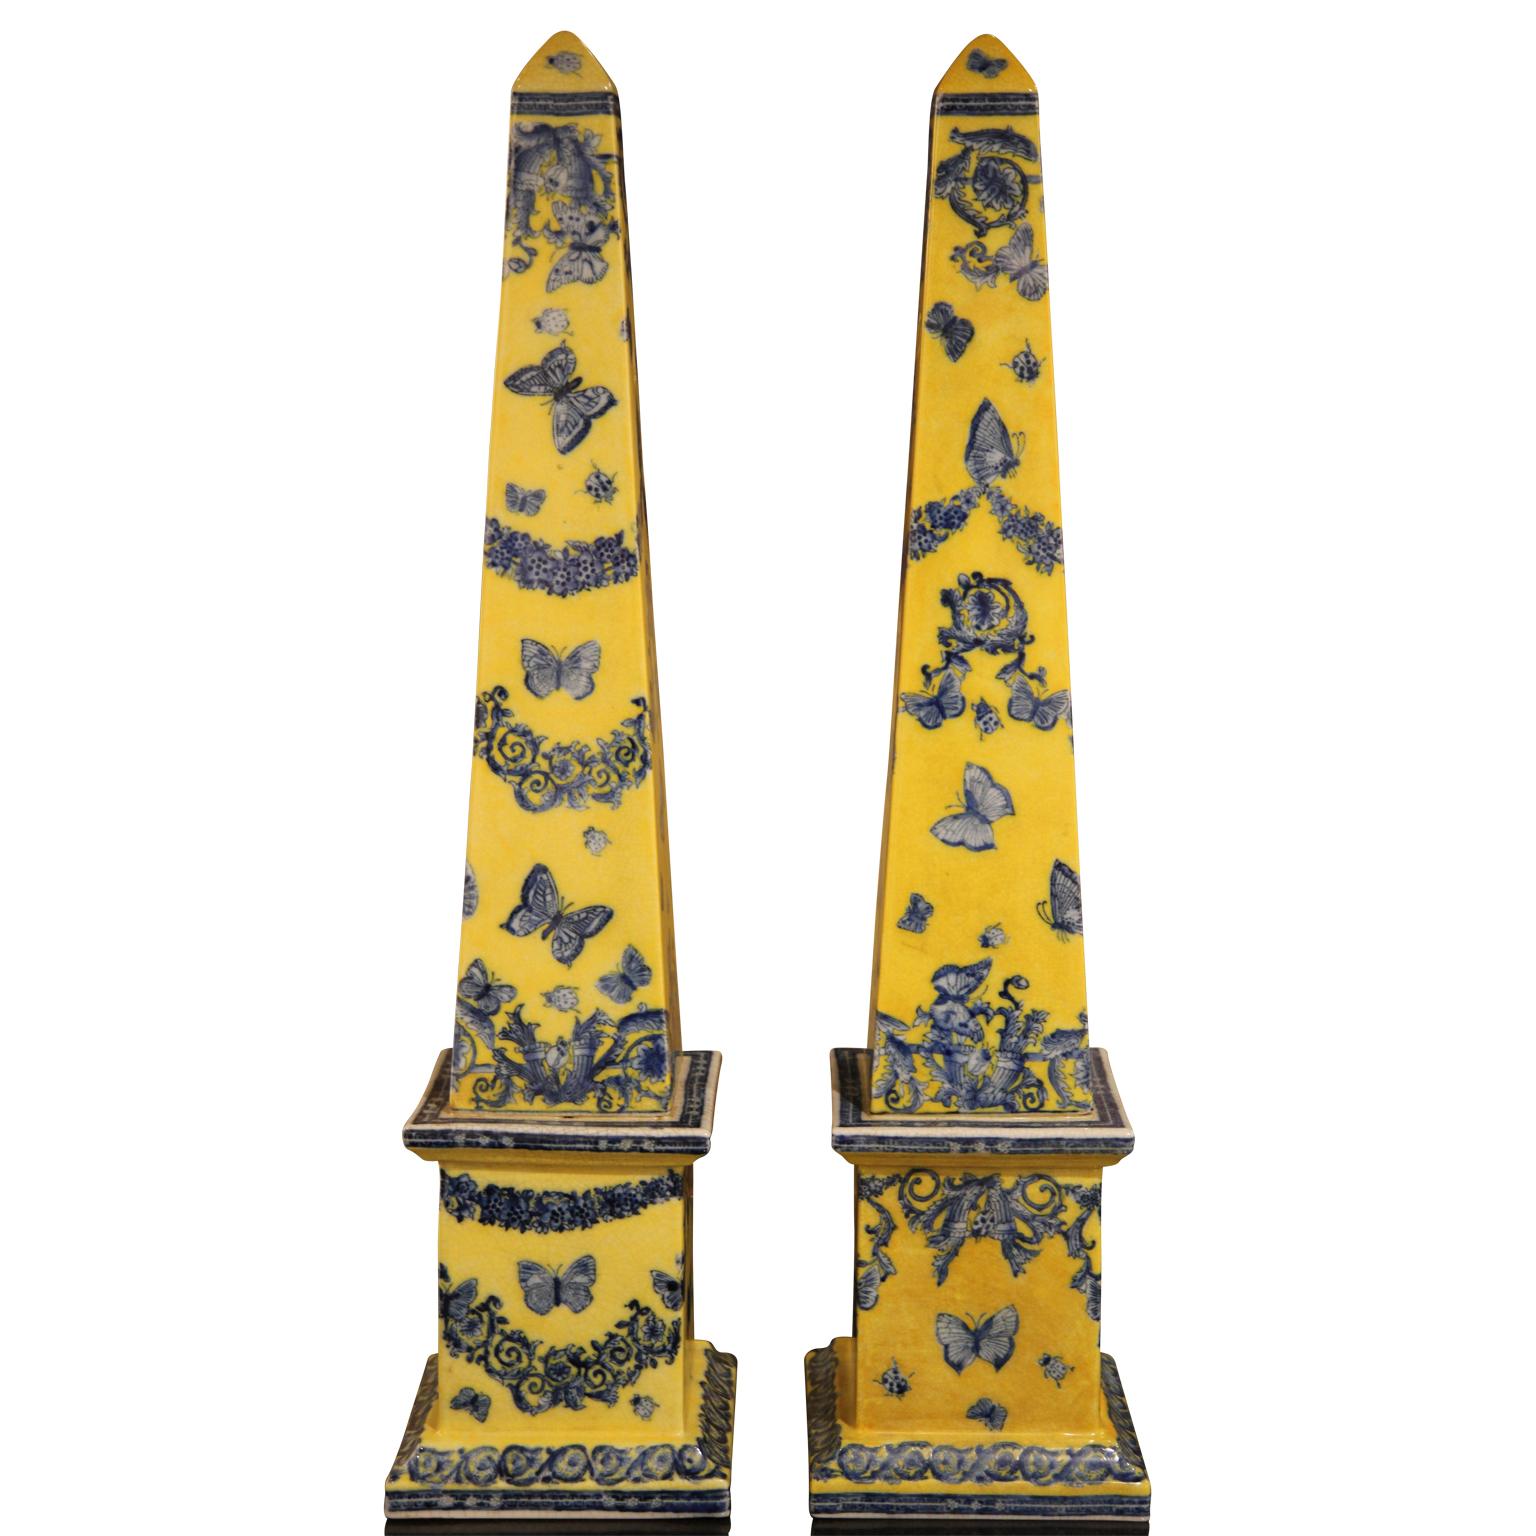 Pair of bright yellow obelisks with cobalt blue butterflies and flowers. The pair is identical with alternating designs on each face.